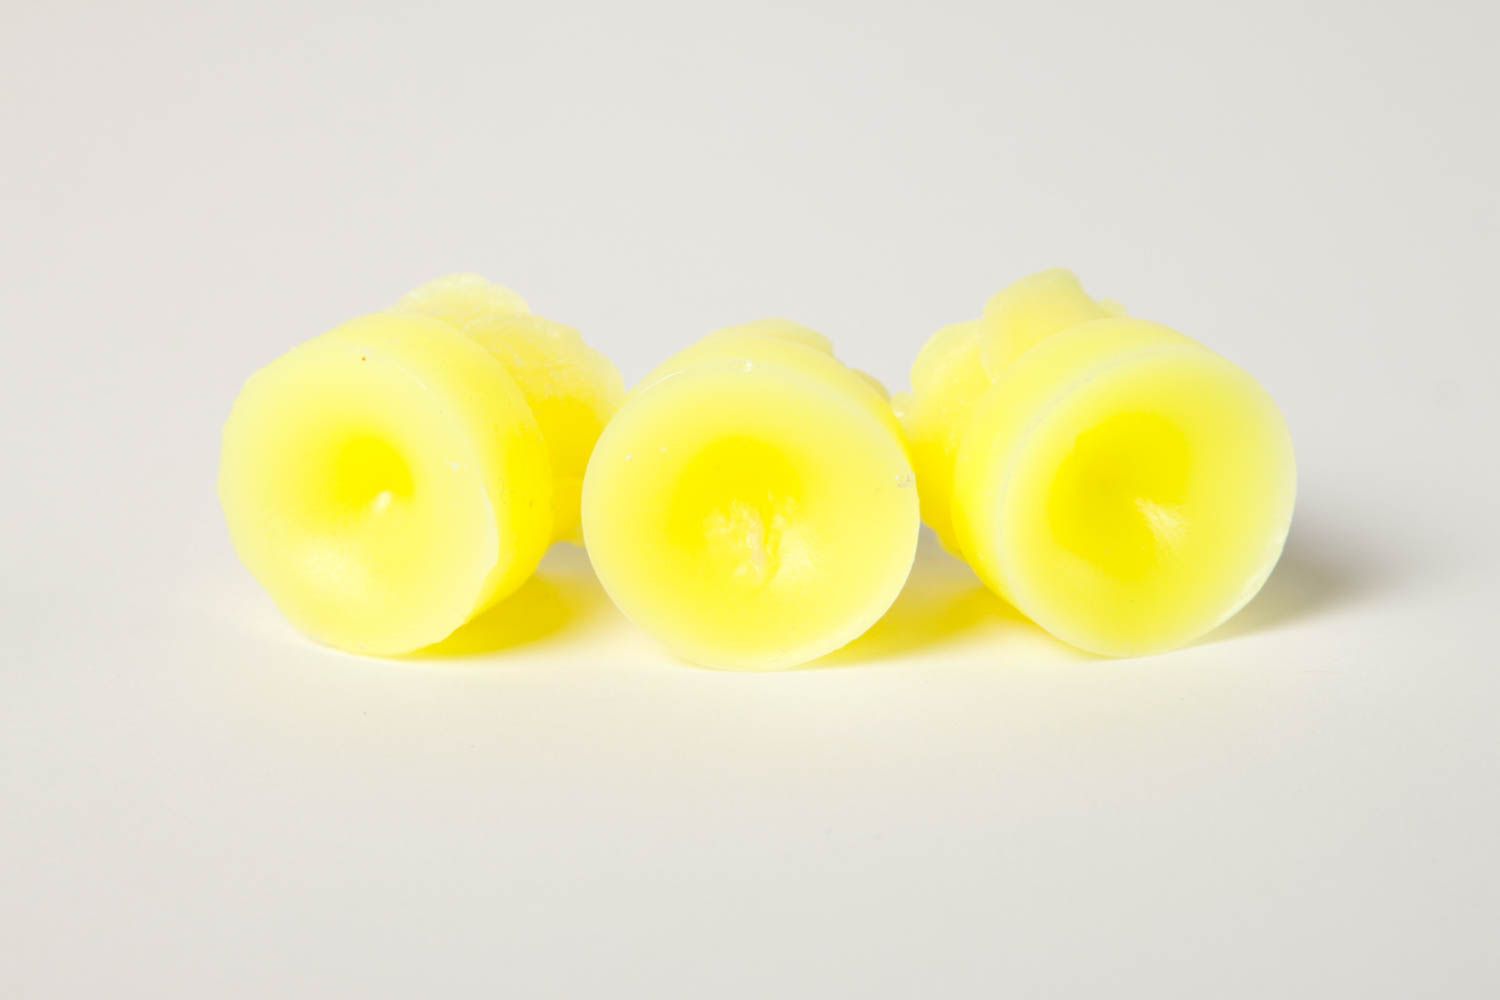 Handmade beautiful candles bright yellow candles 3 cute decor elements photo 5